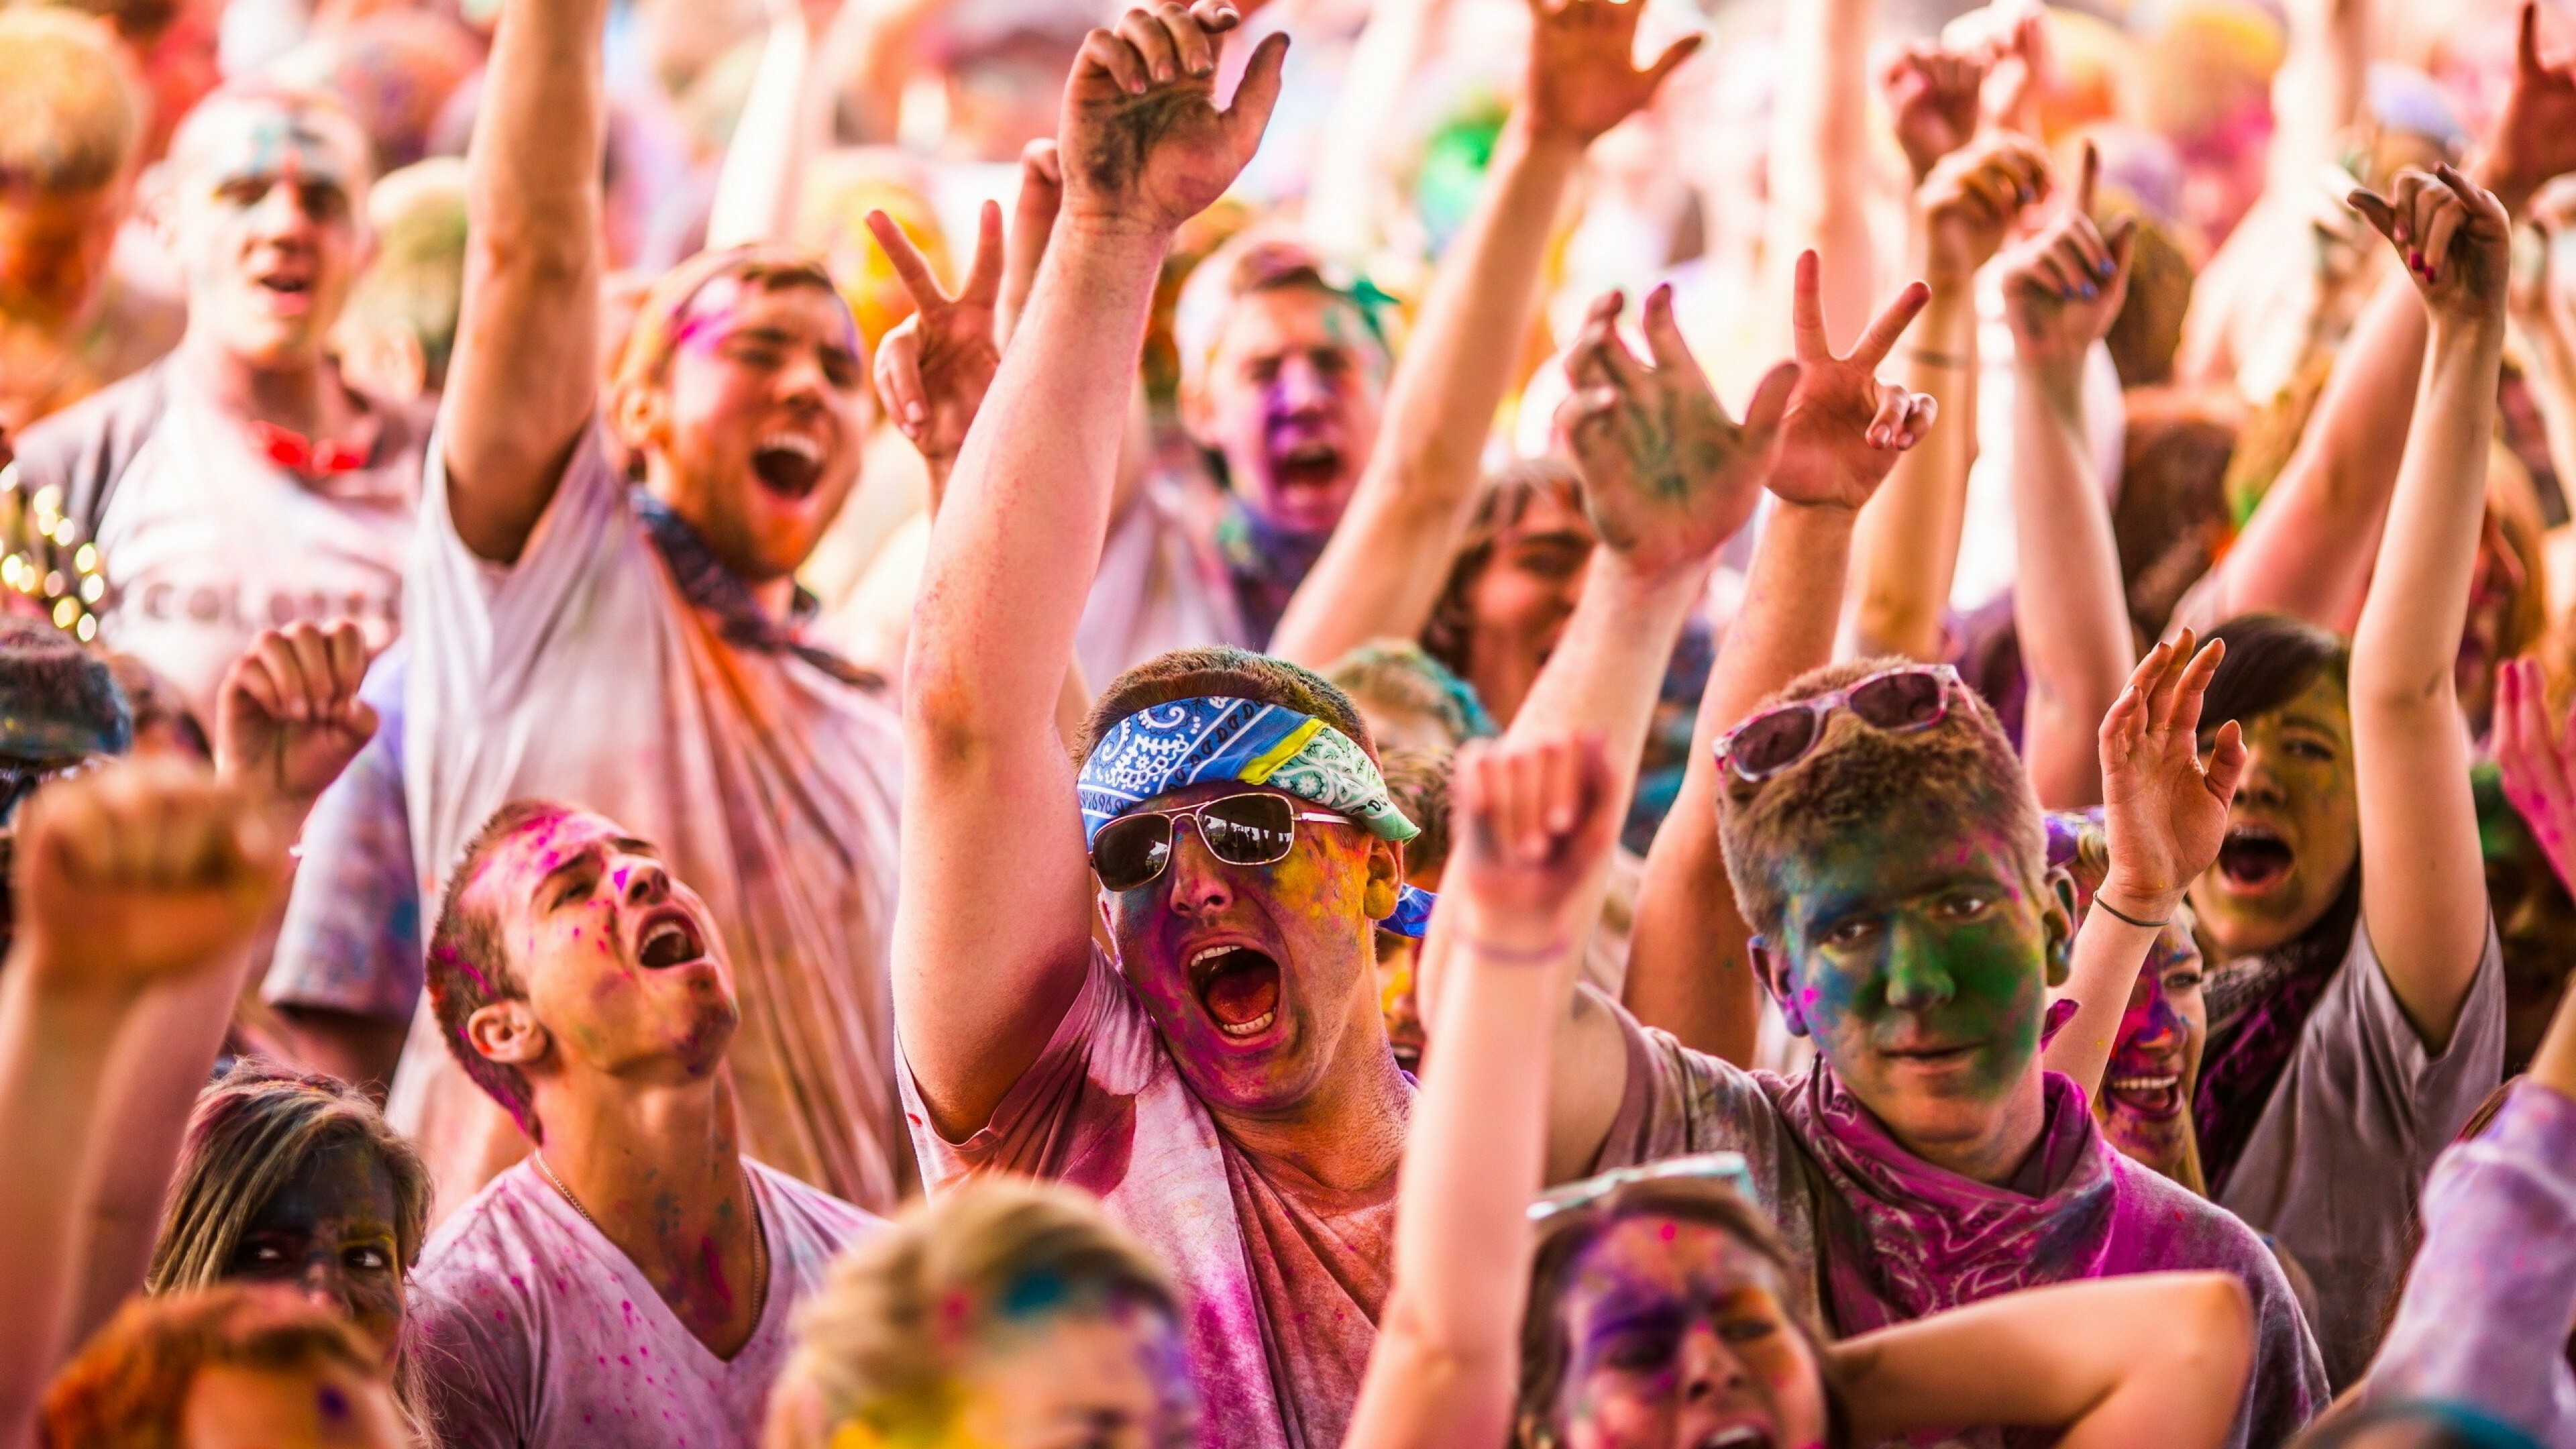 Party: The Color Run, An event series and five-kilometer paint race, inspired by the Hindu festival of Holi. 3840x2160 4K Wallpaper.